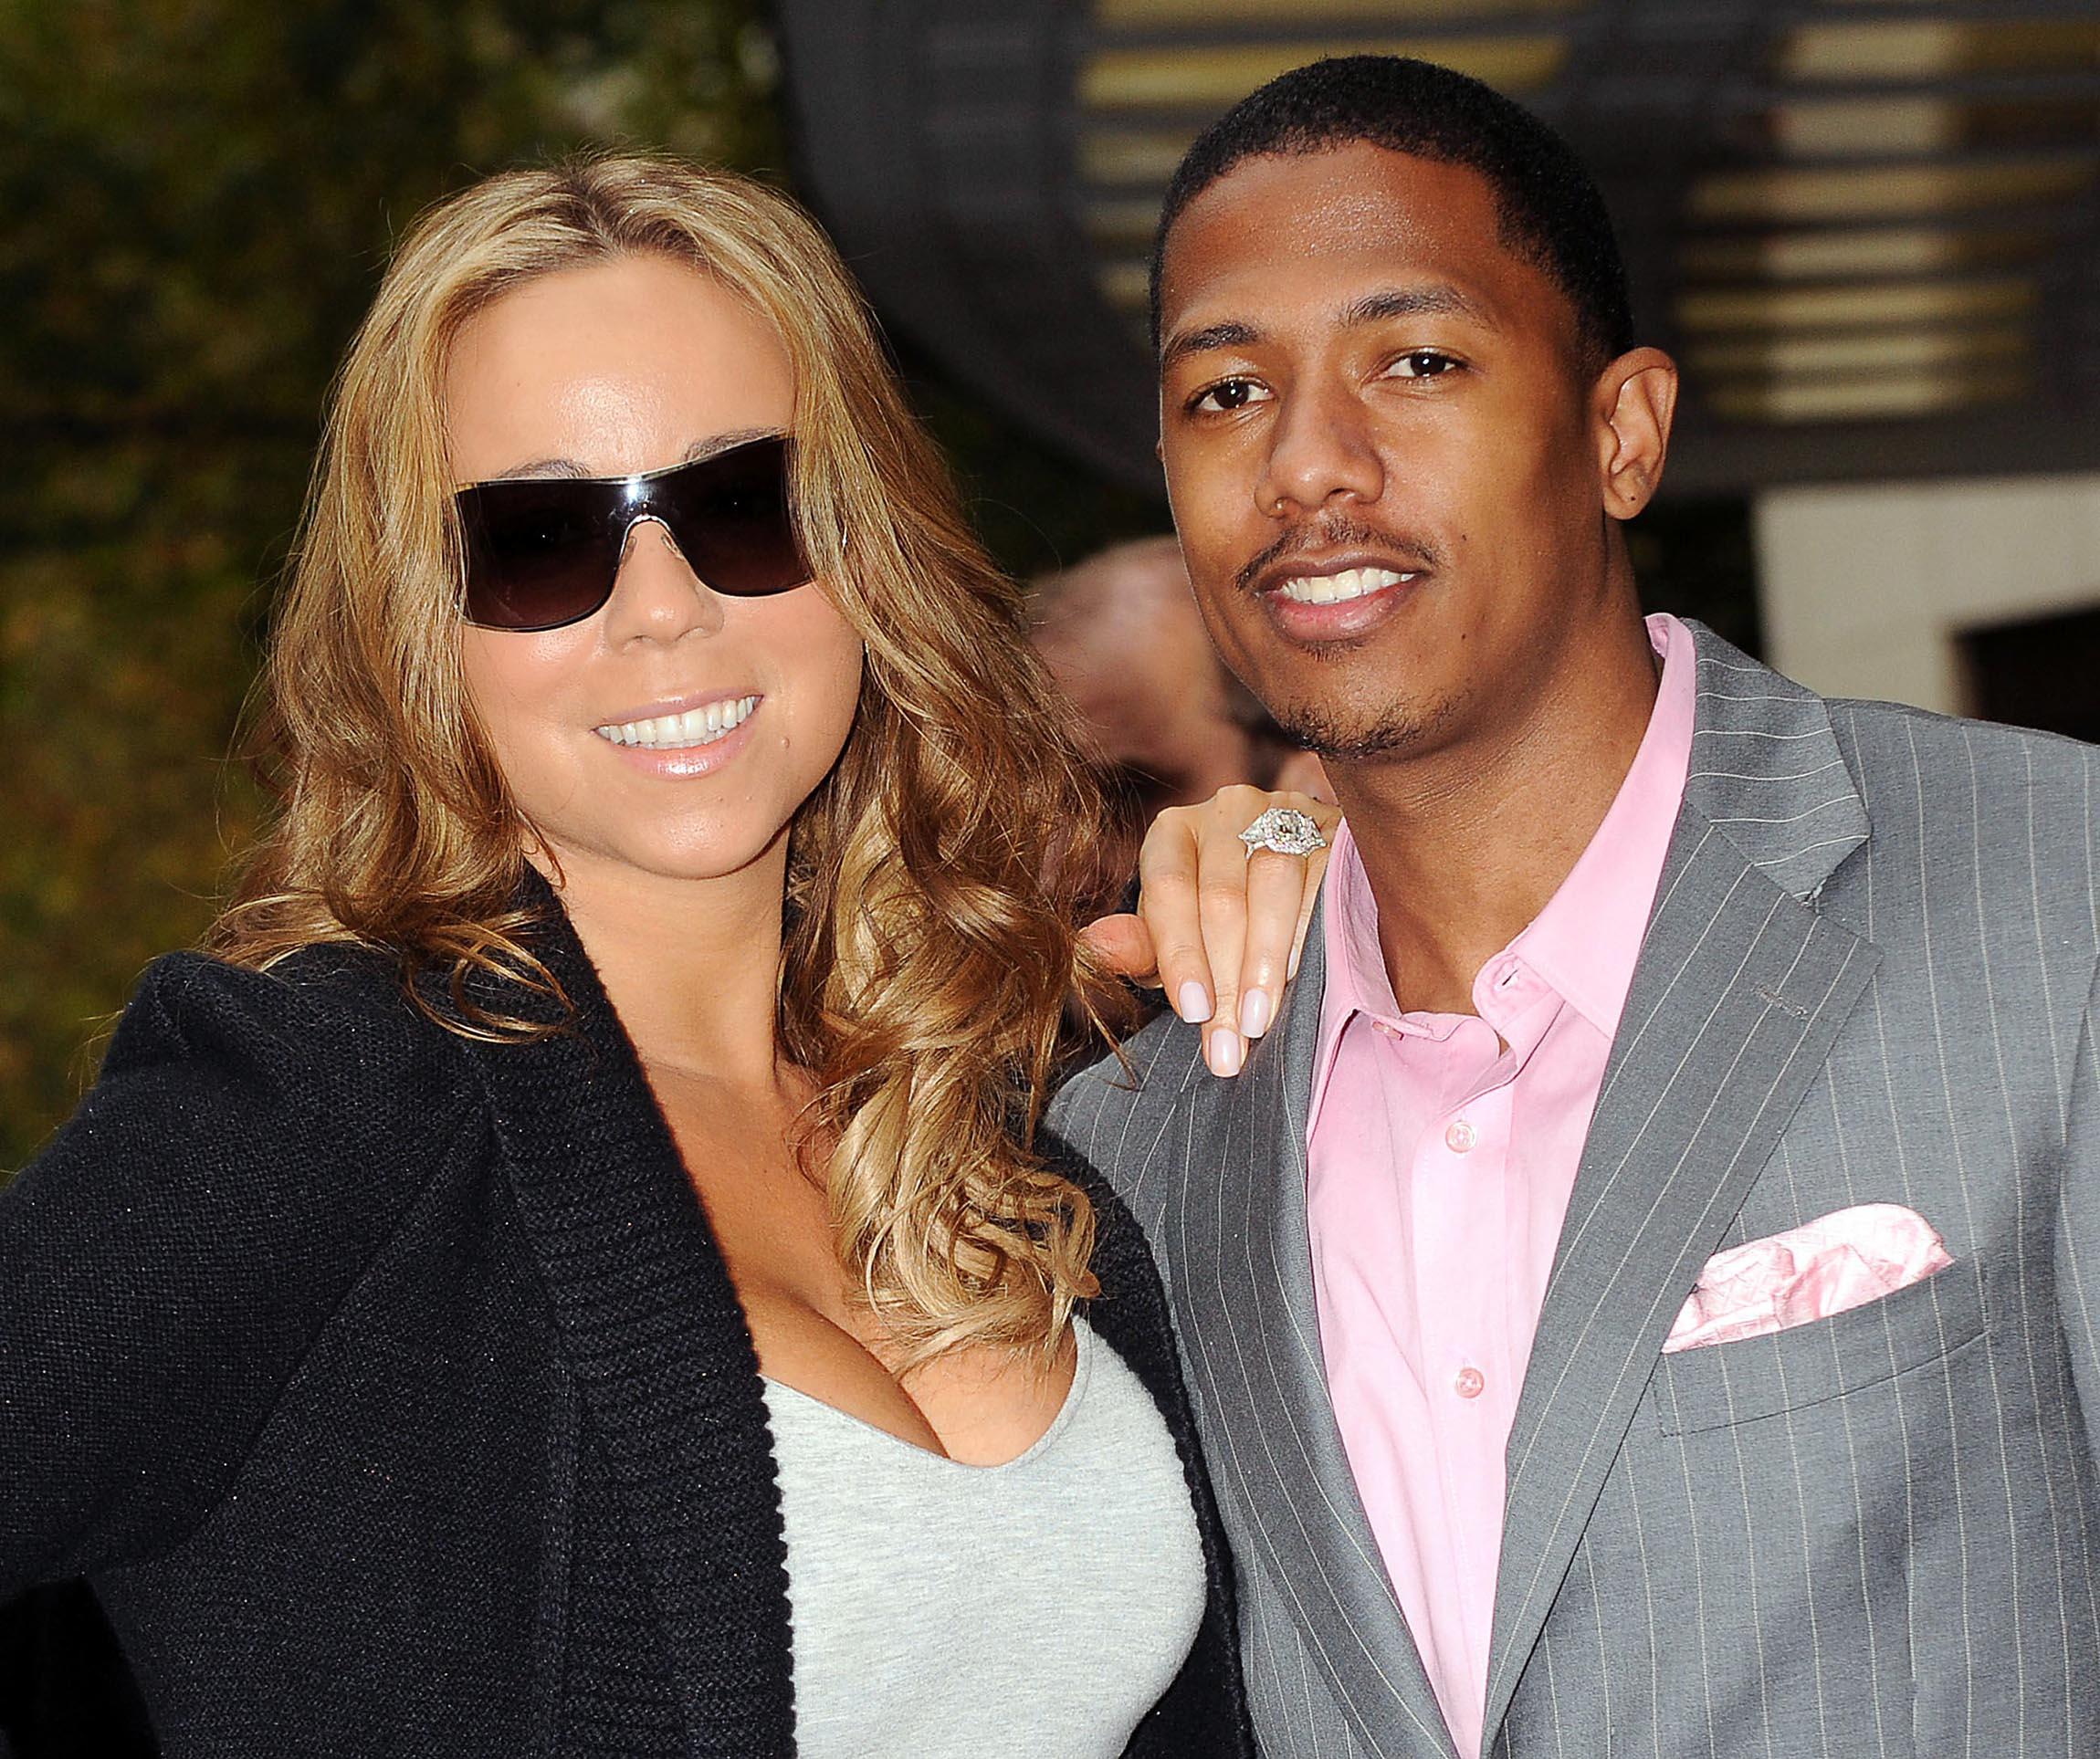 Nick Cannon and Mariah Carey smiling